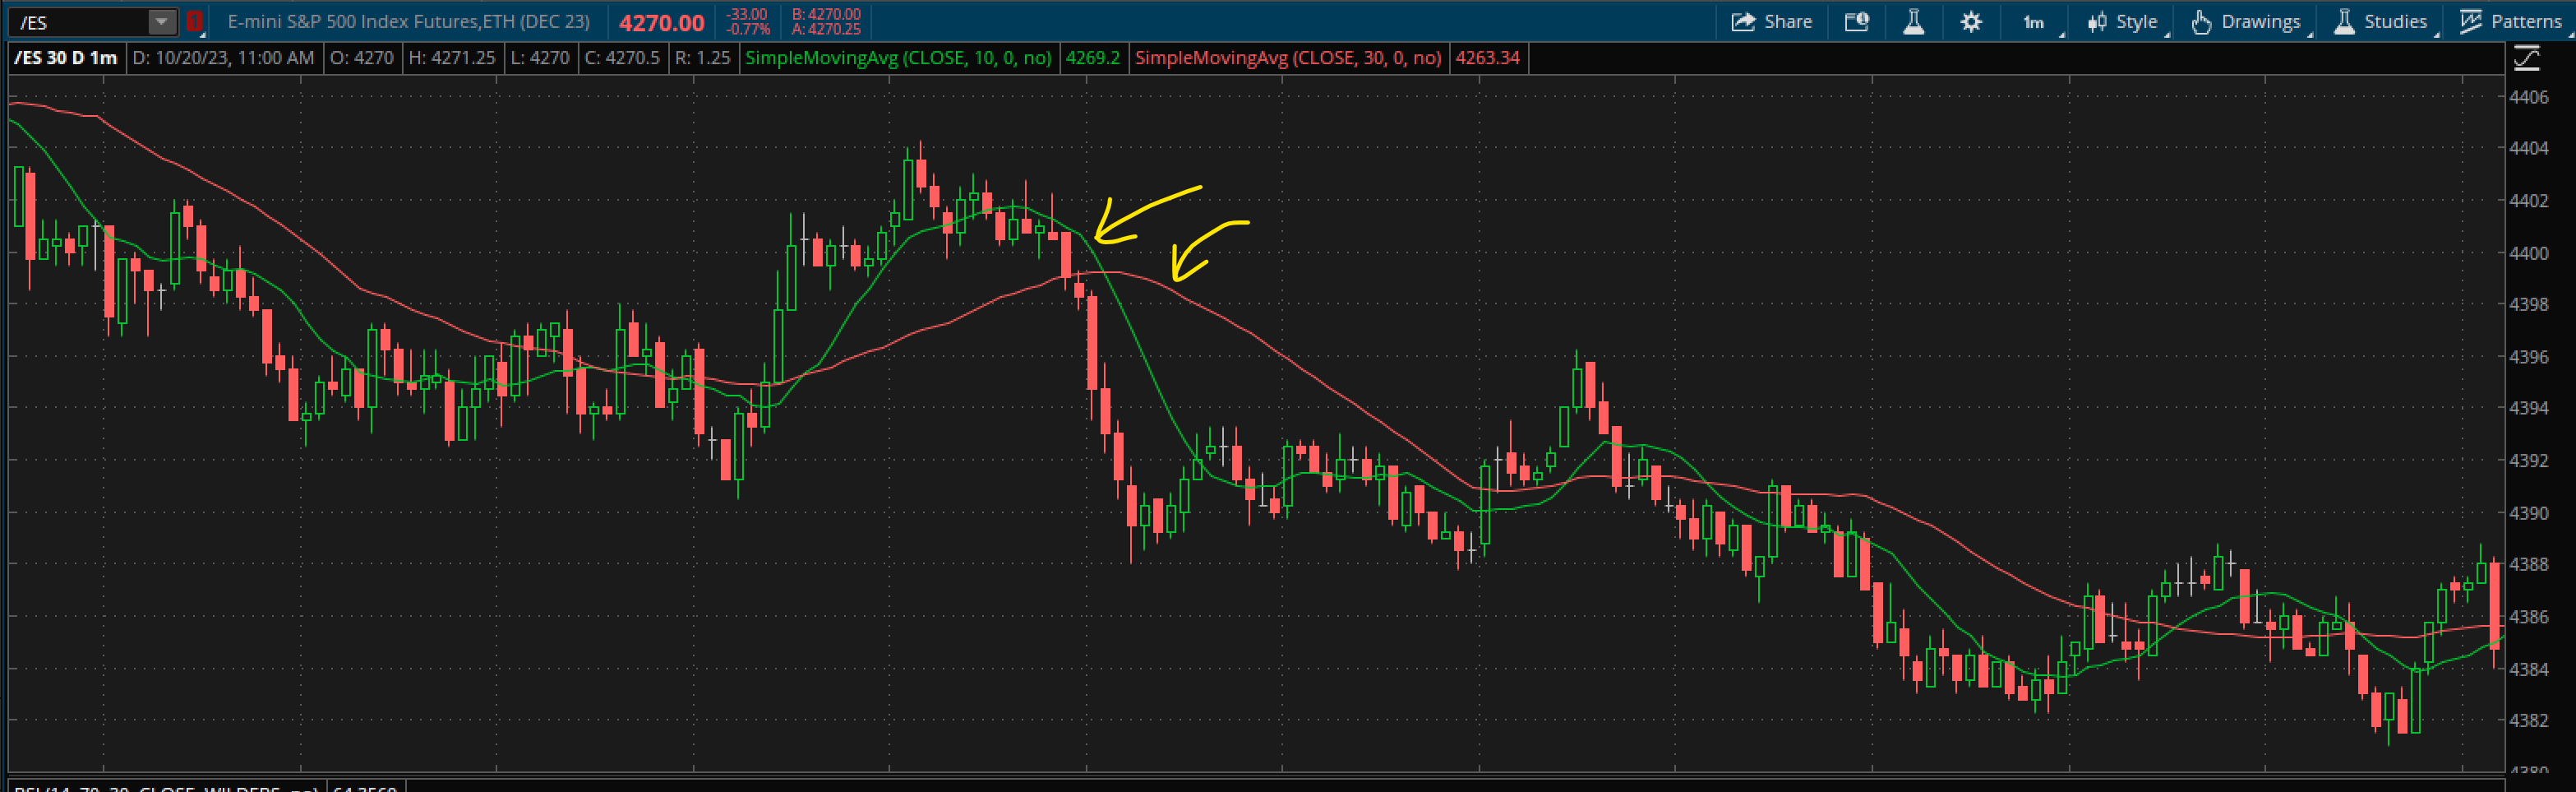 Image of the ES 1 min chart with 10 SMA(green) and 30 SMA(red) noted.